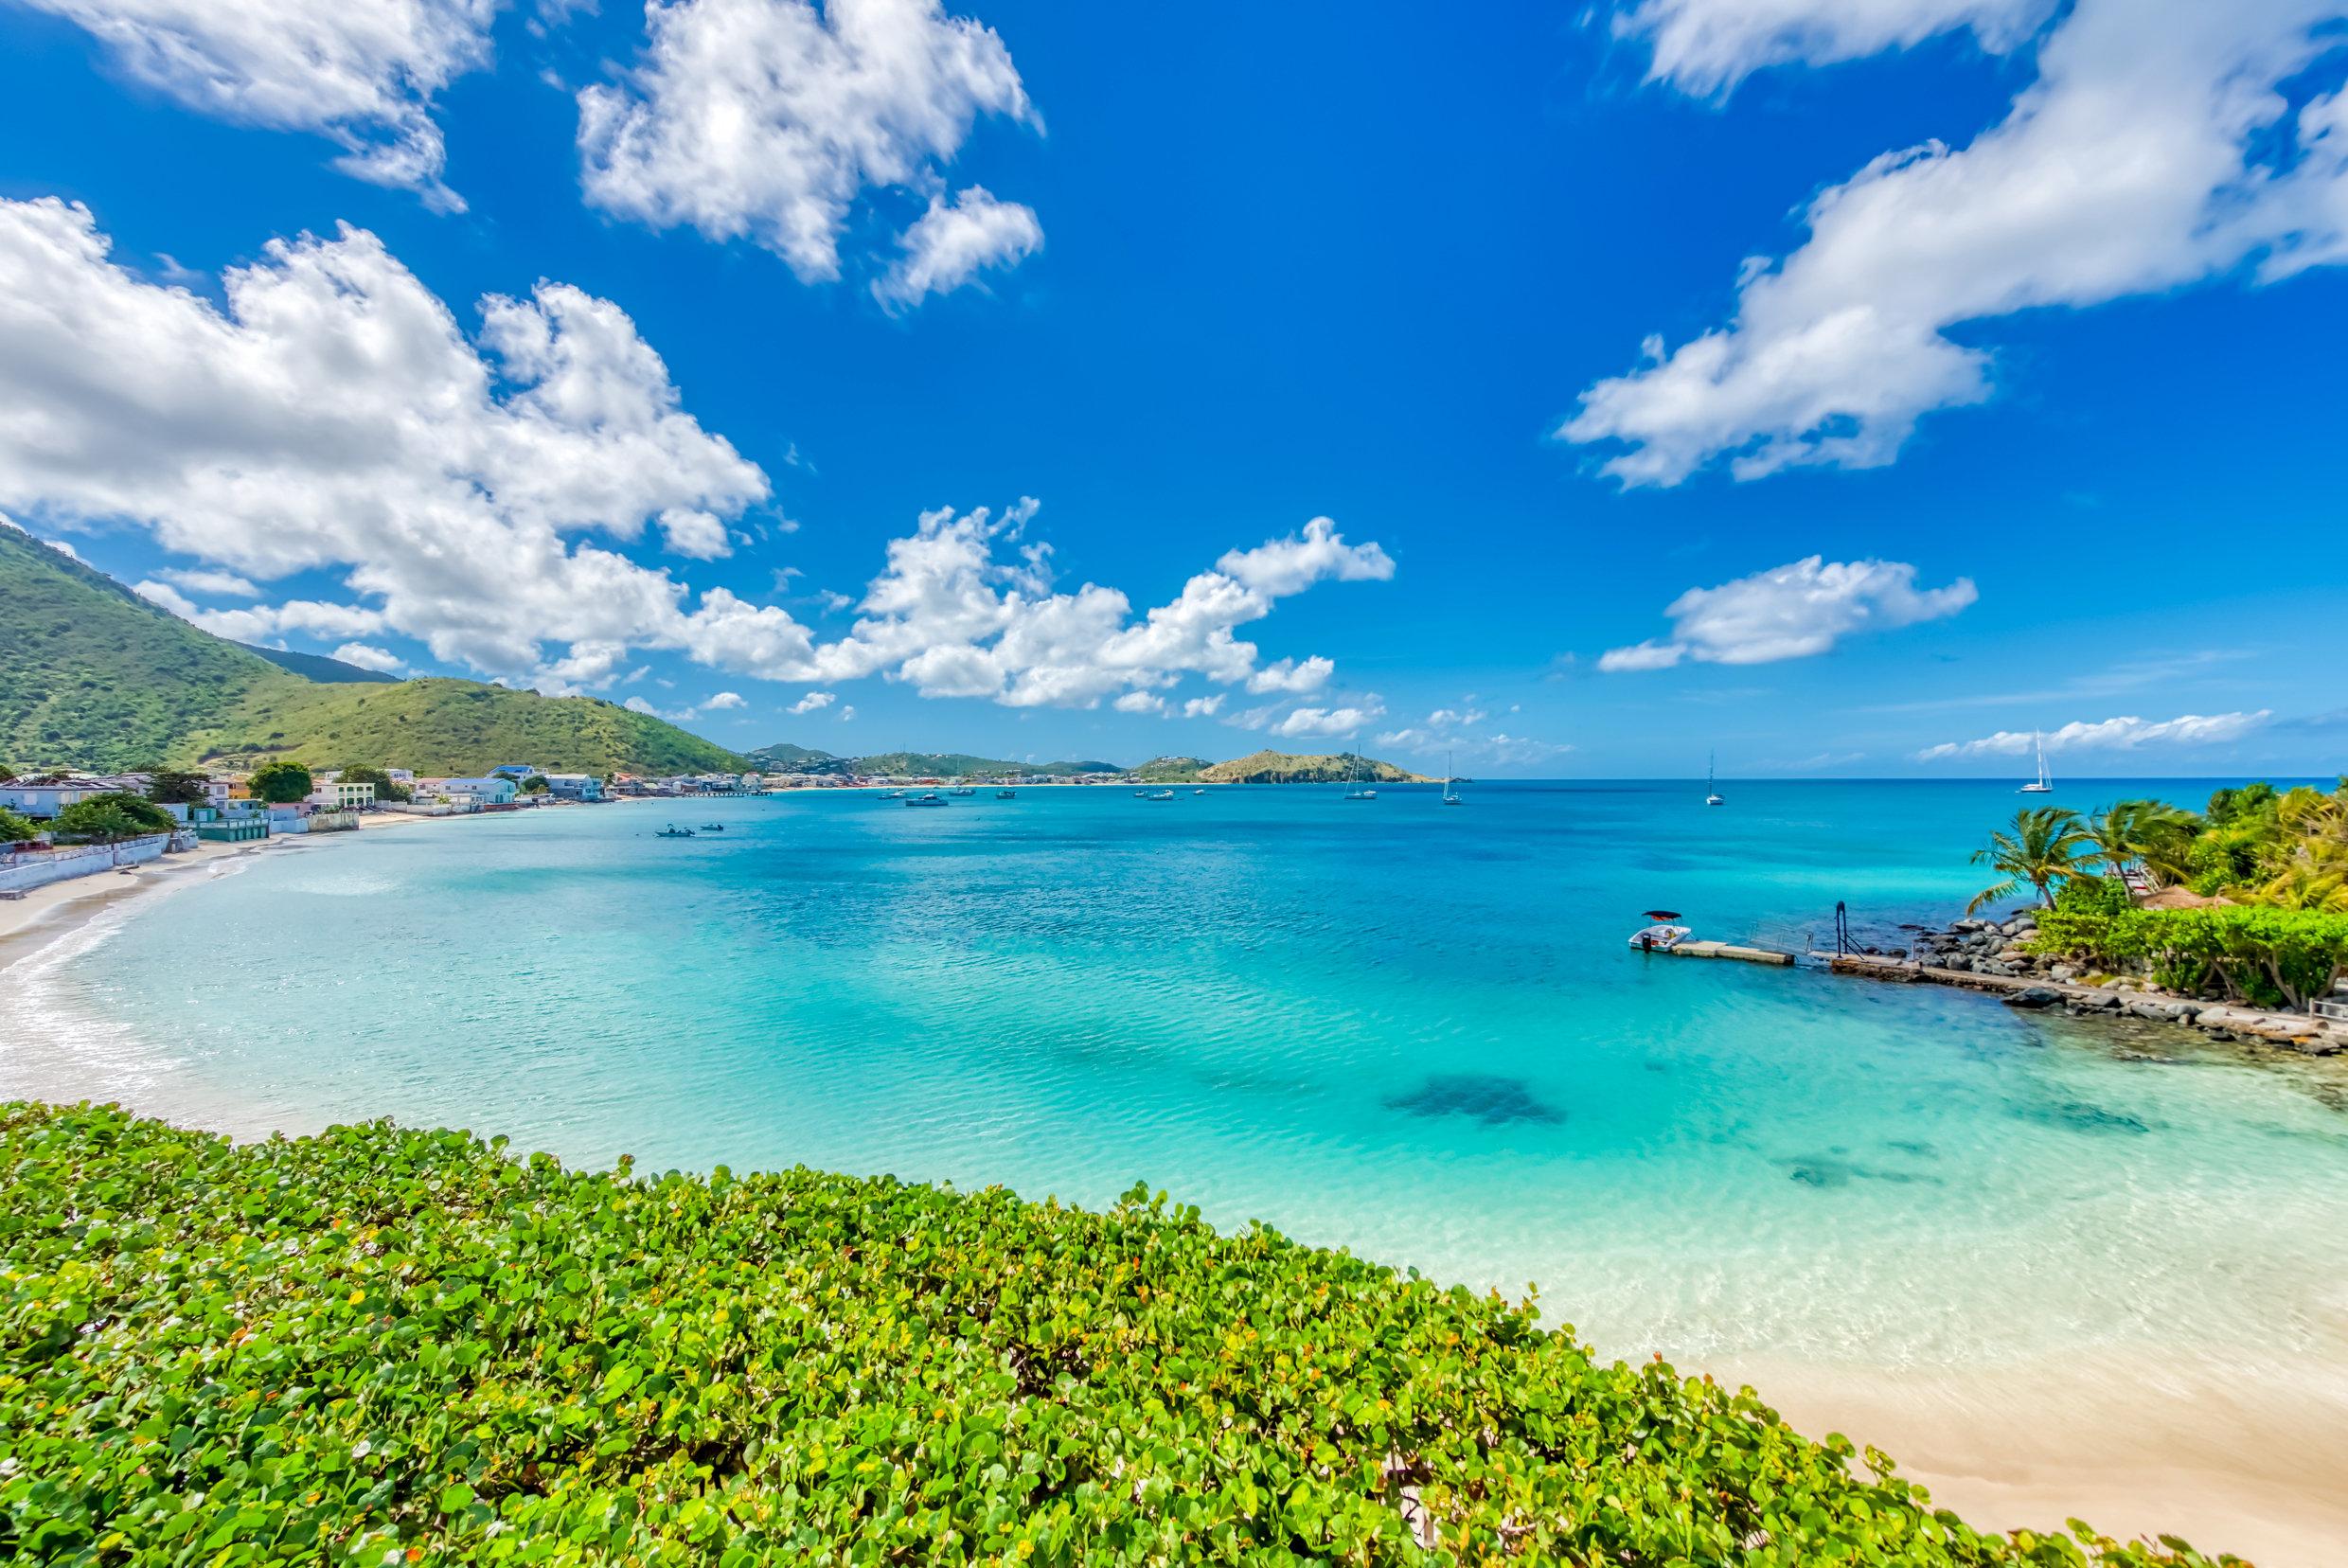 Saint Martin Hotels: Compare Hotels In Saint Martin From $58 Night On KAYAK